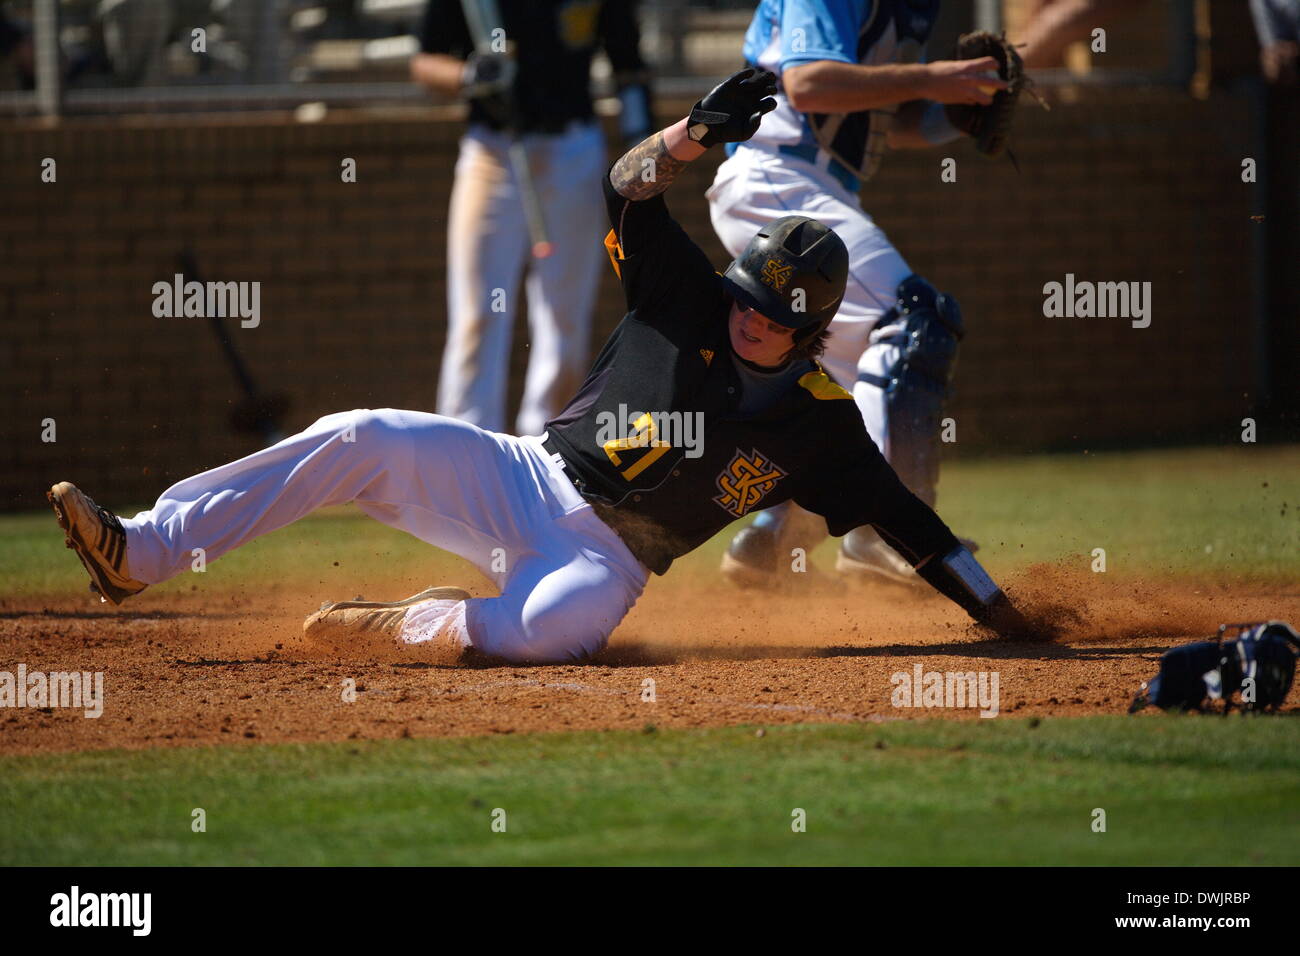 Kennesaw, Georgia, USA.  March 8, 2014 -- Catcher Brennan Morgan (21) slides in safely for KSU during the first game of Saturday's doubleheader between Columbia University and Kennesaw State University. The teams split the doubleheader. Credit:  Wayne Hughes | Alamy Live News Stock Photo